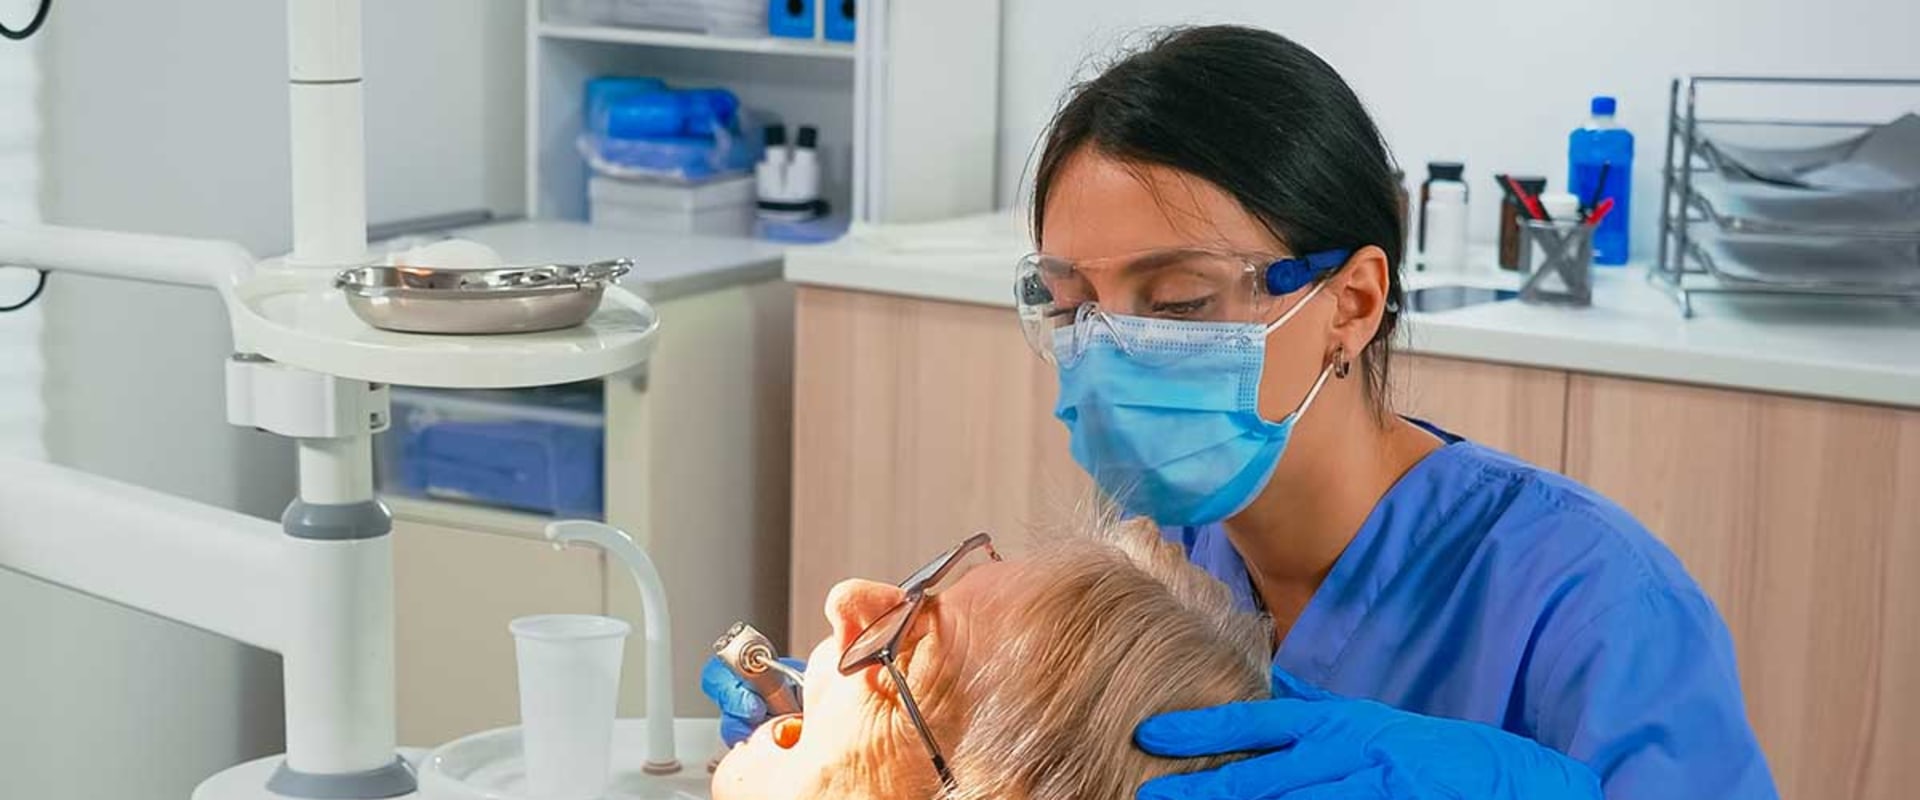 Do Emergency Dentists Offer Tooth Extractions?